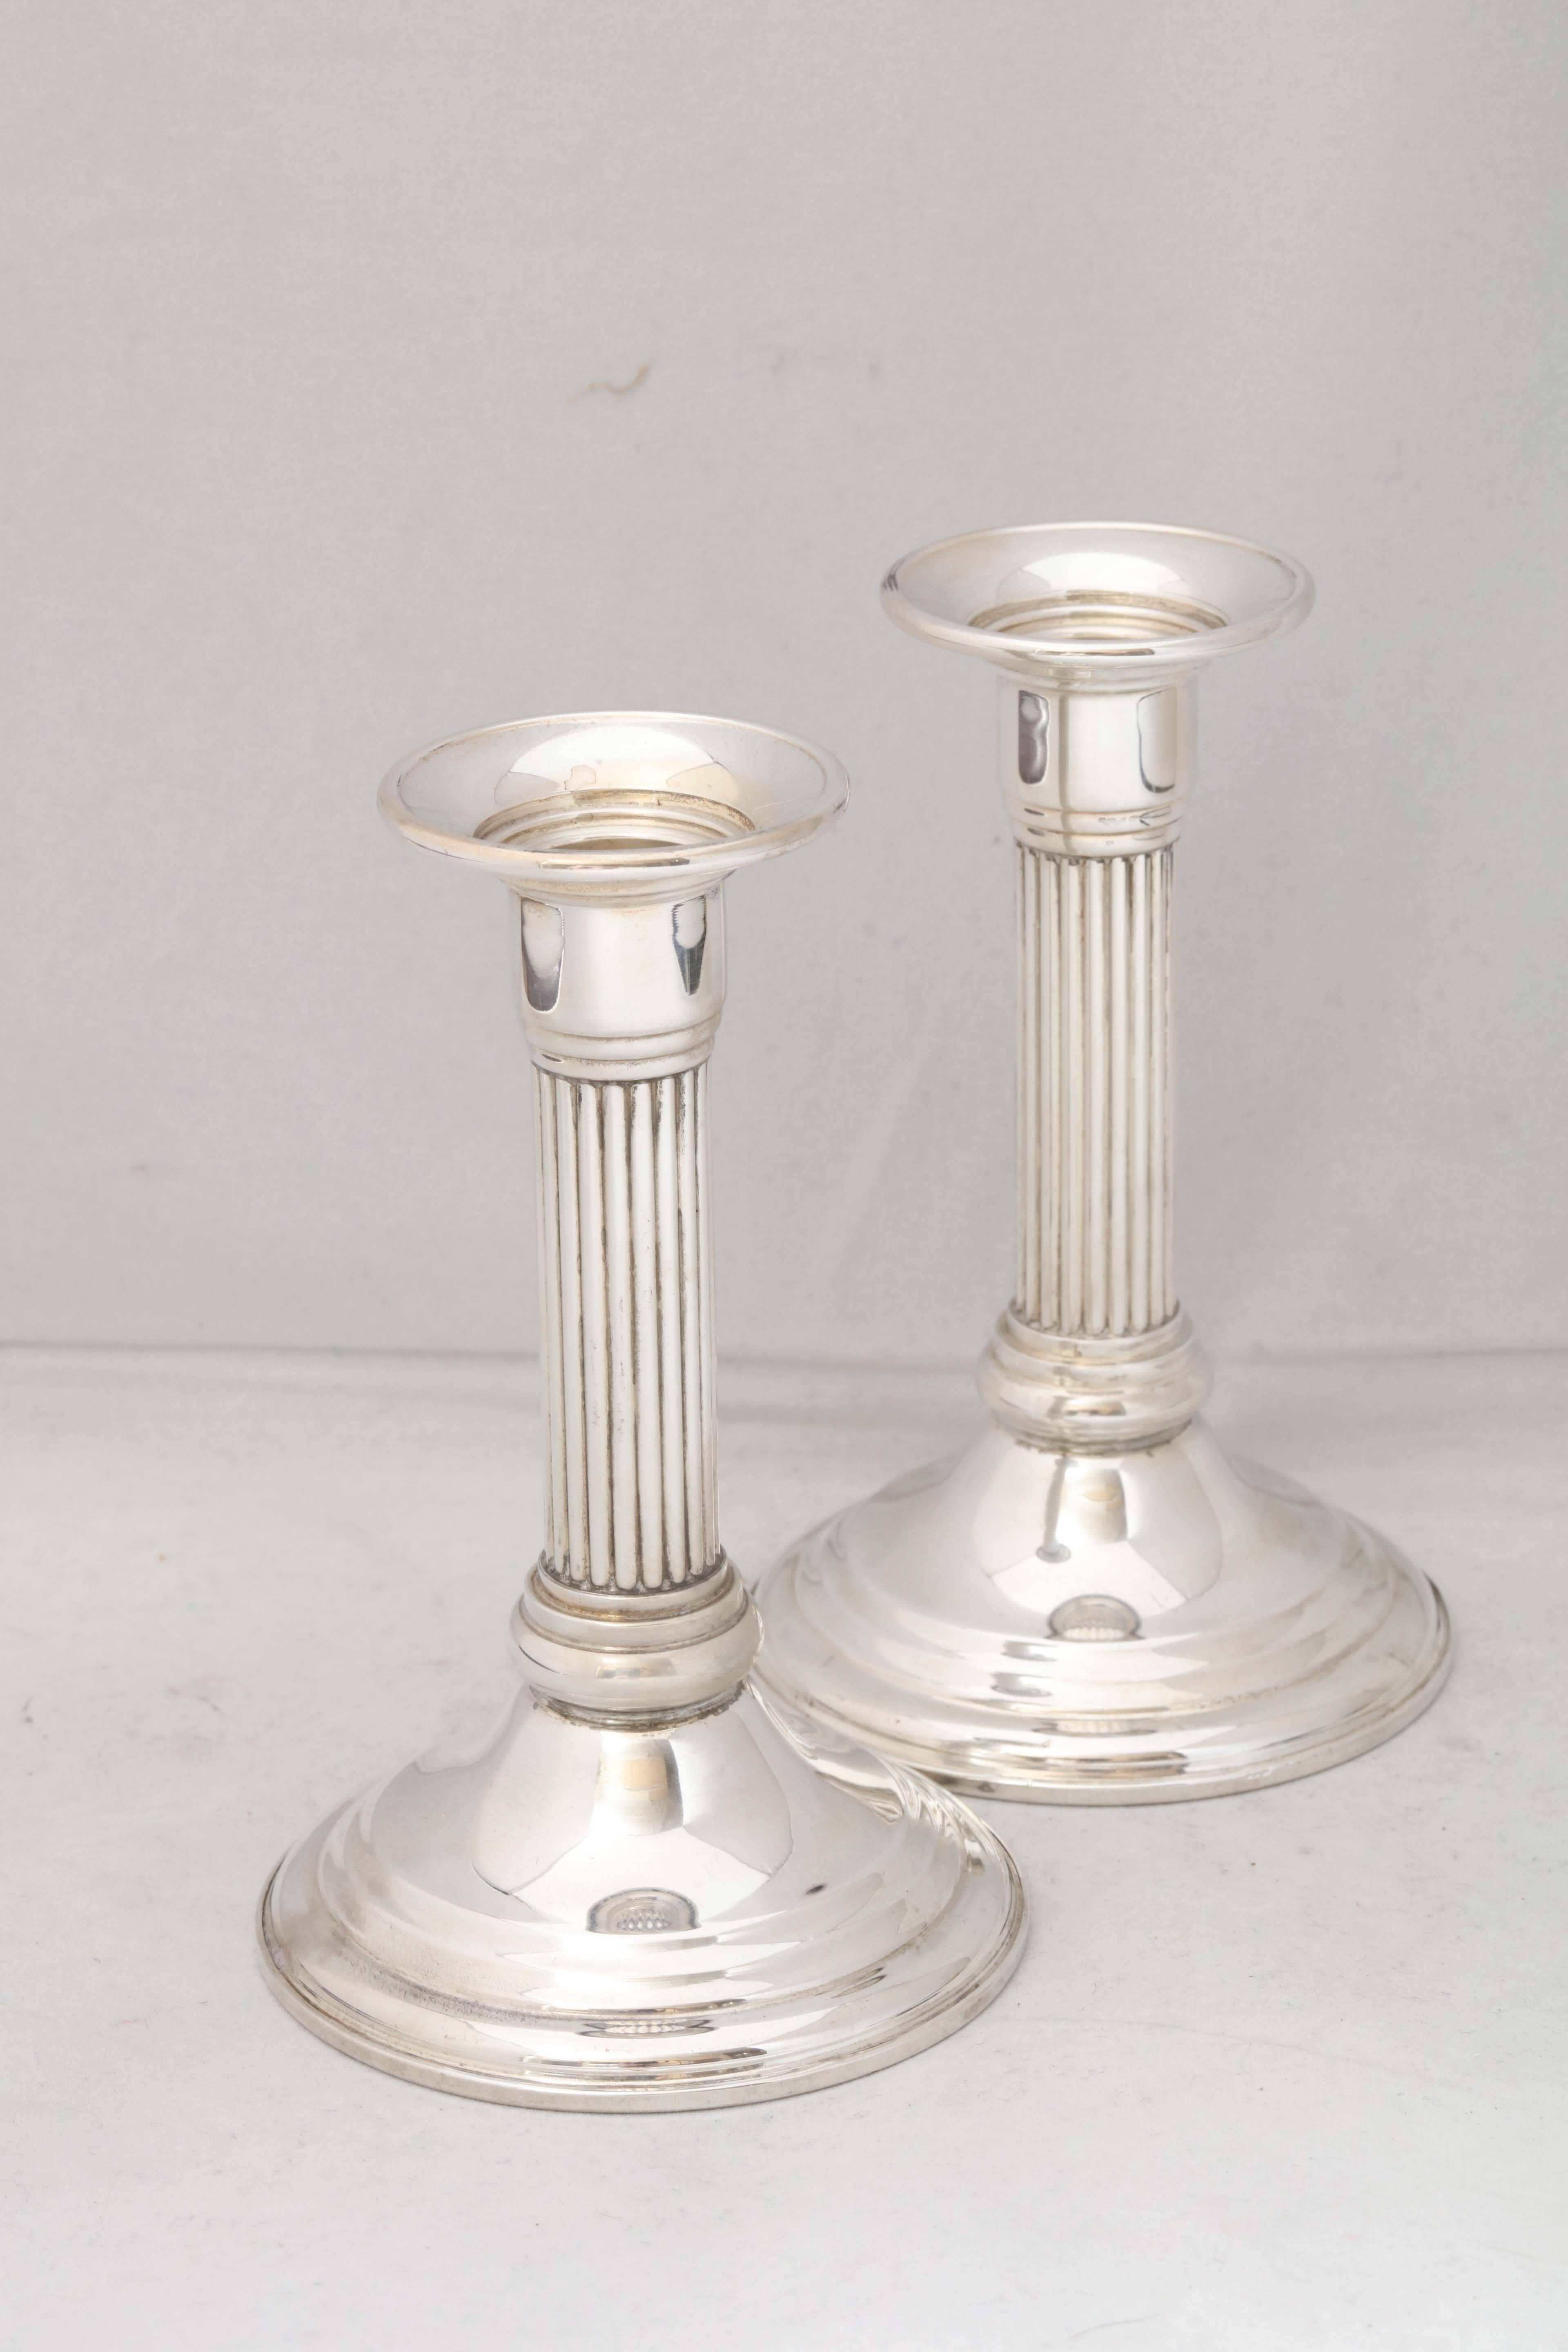 Pair of sterling silver, neoclassical candlesticks with 